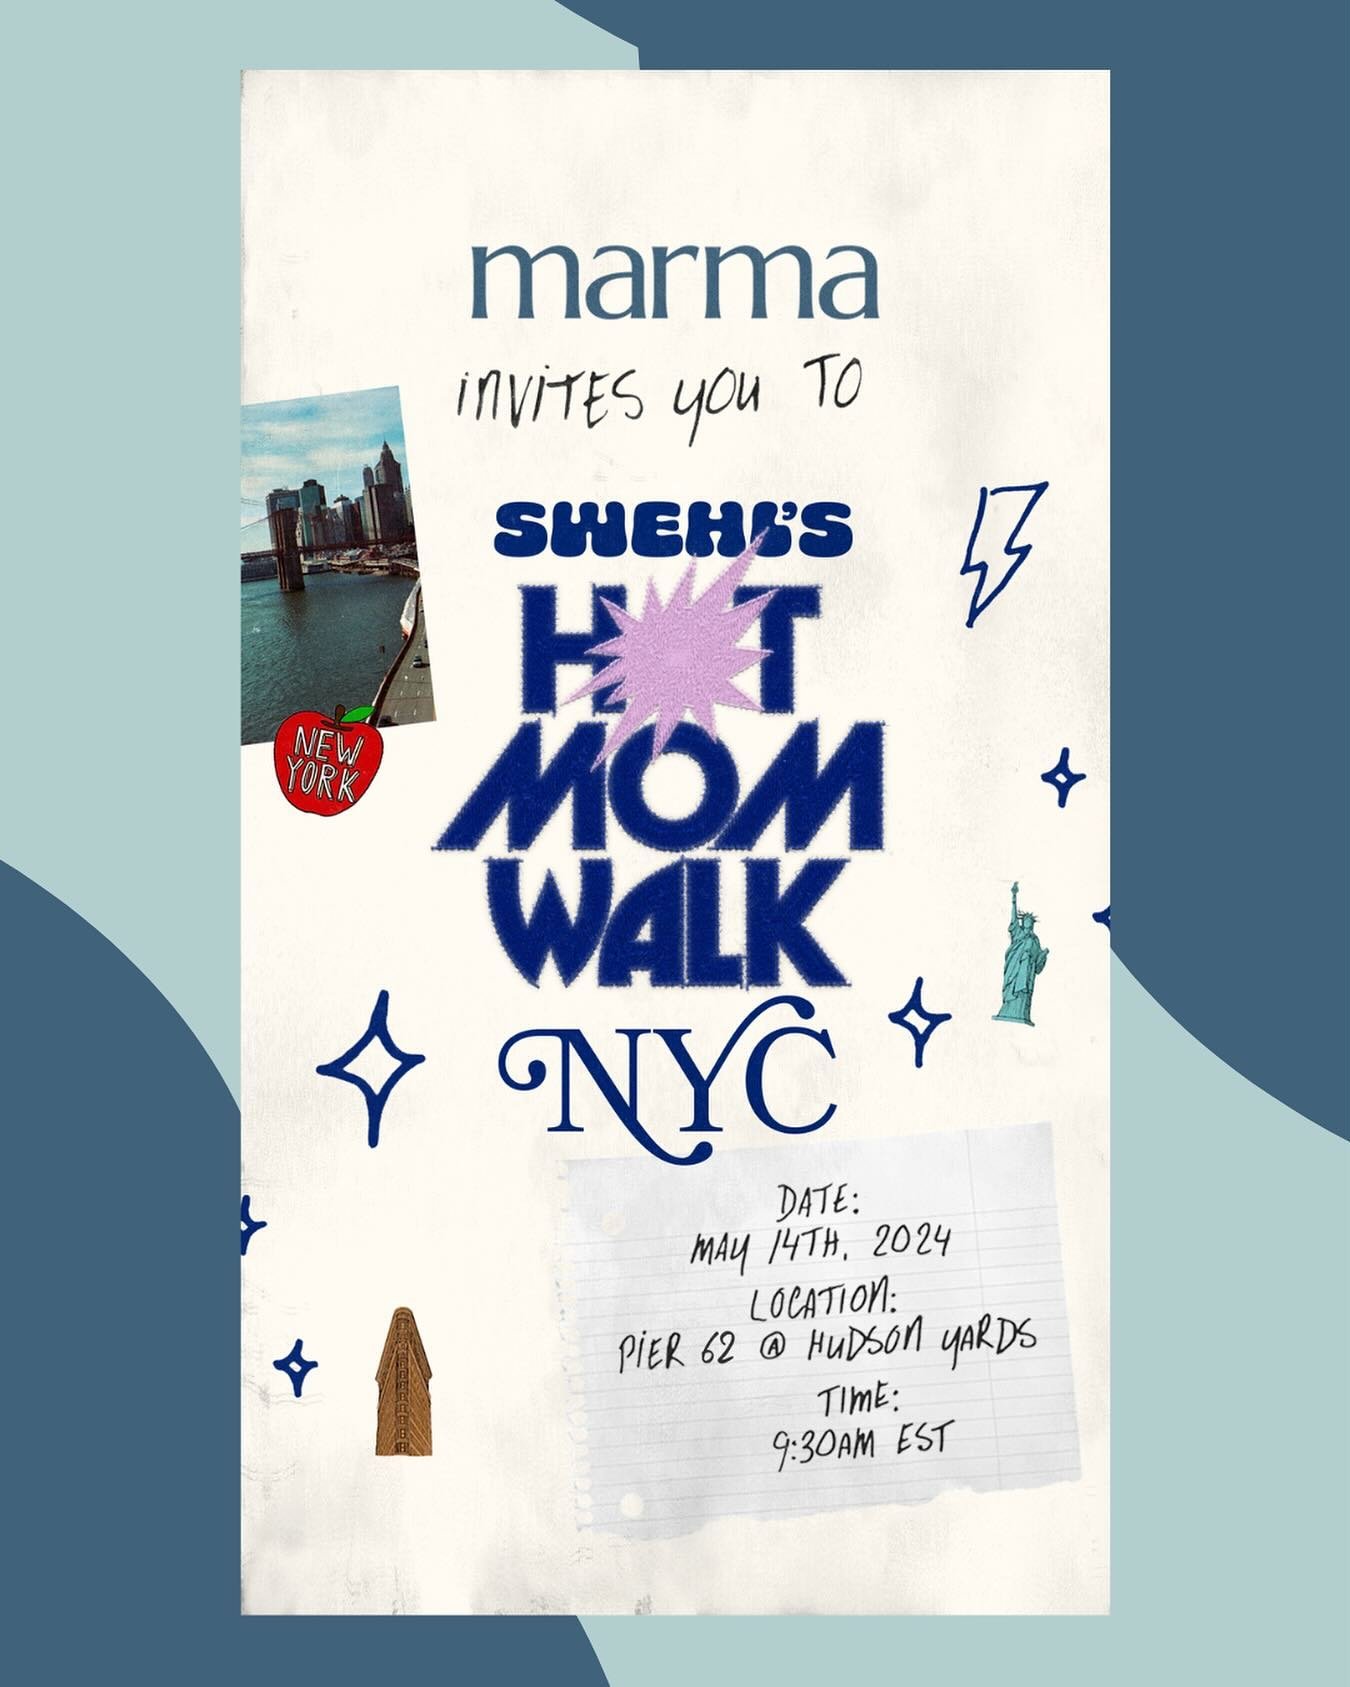 📣 NYC Moms 📣

We&rsquo;re excited to partner with @swehl on their tour of Hot Mom Walks. Be sure to stop by (Pier 62 @ Hudson Yards) for a great community, good tunes, and snag some goodies&hellip; 👀 for Marma Bars!

If you&rsquo;re in the area, y